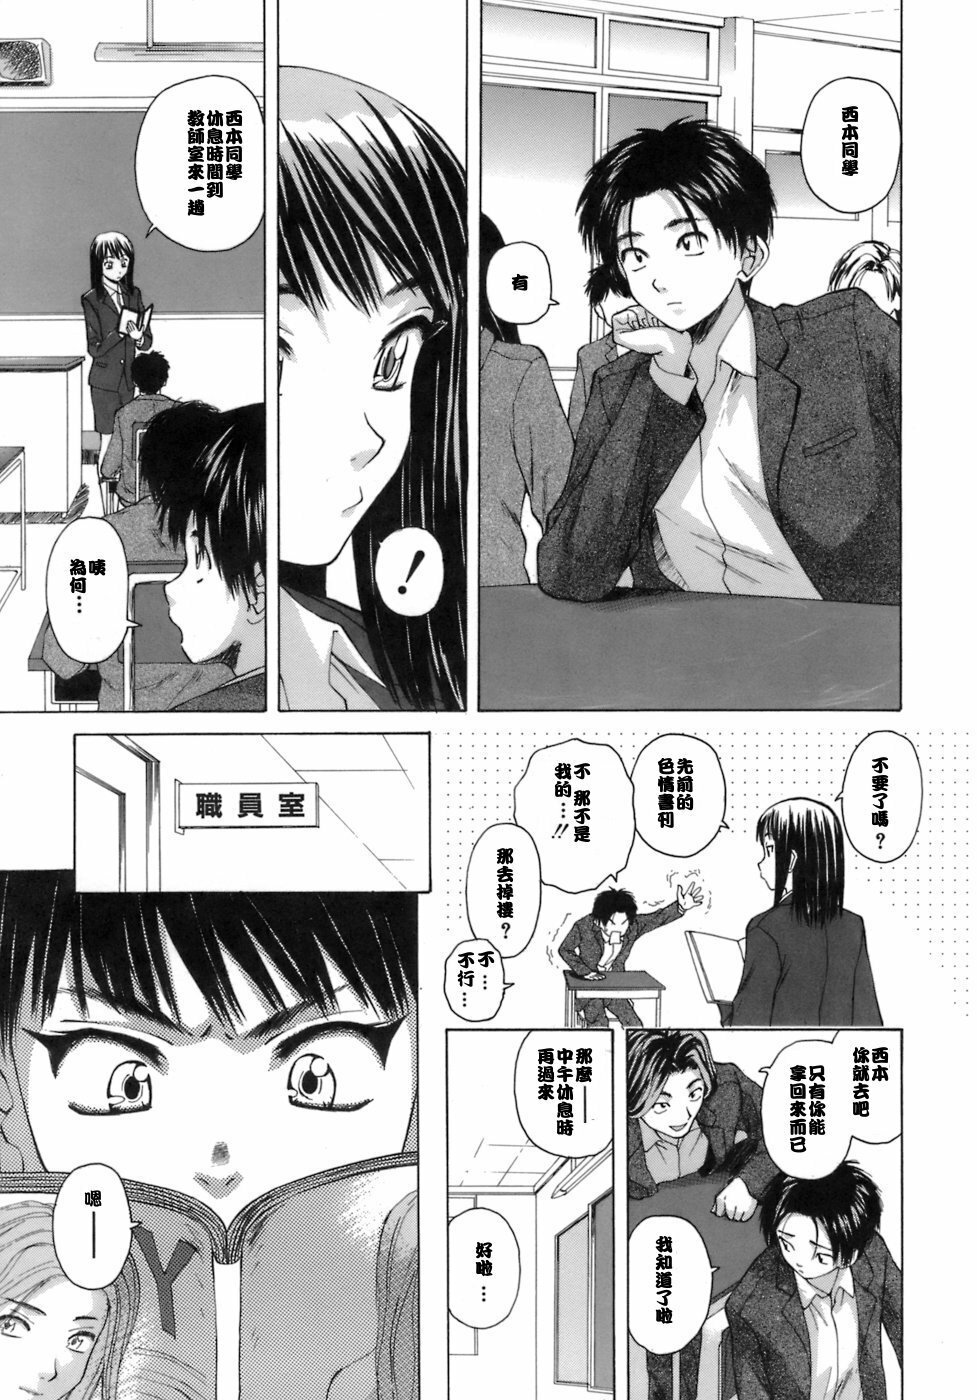 [Fuuga] Kyoushi to Seito to - Teacher and Student [Chinese] [悠月工房] page 6 full